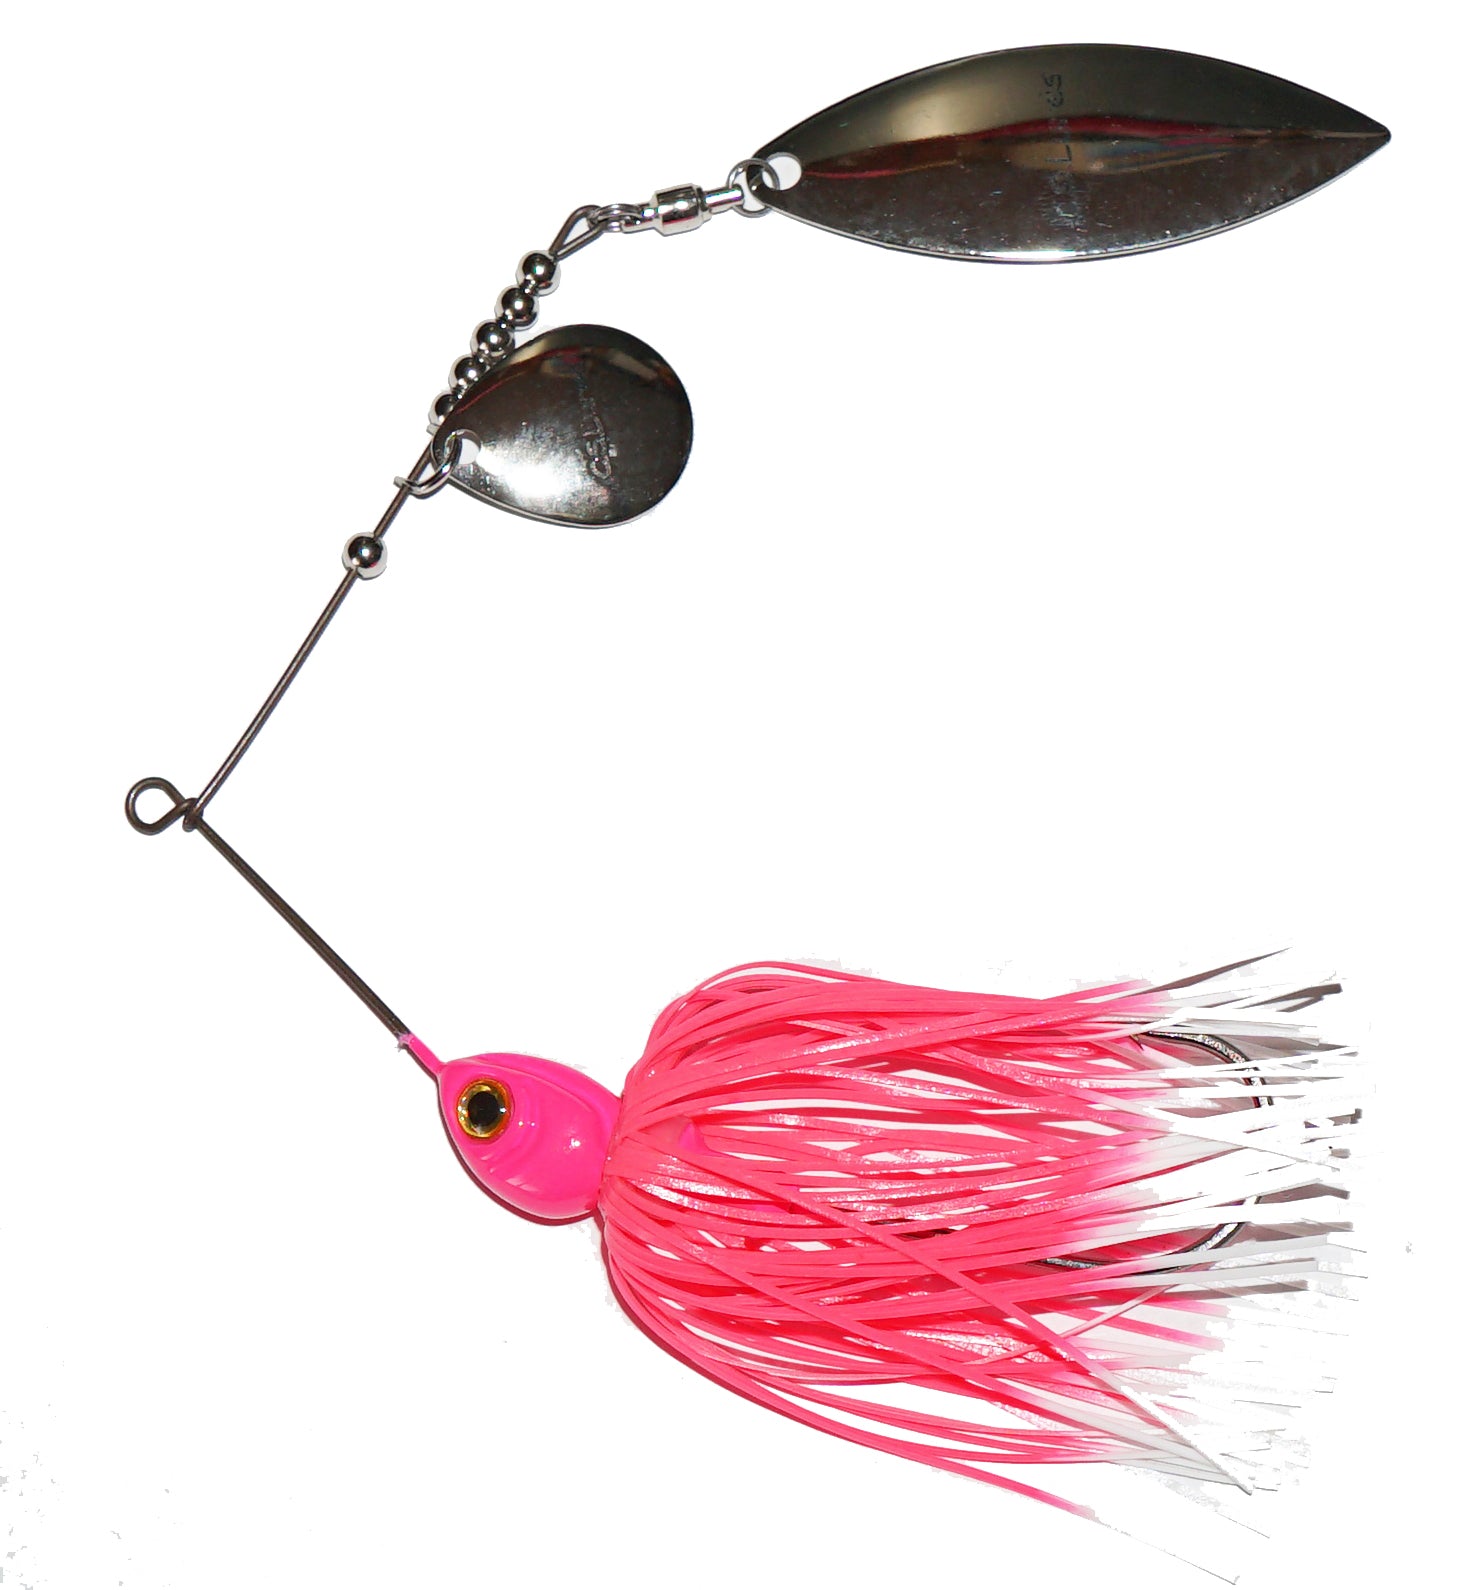 TWIN SPIN SPINNER BAIT 1oz 29g FISHING LURES COD PERCH BASS MADE